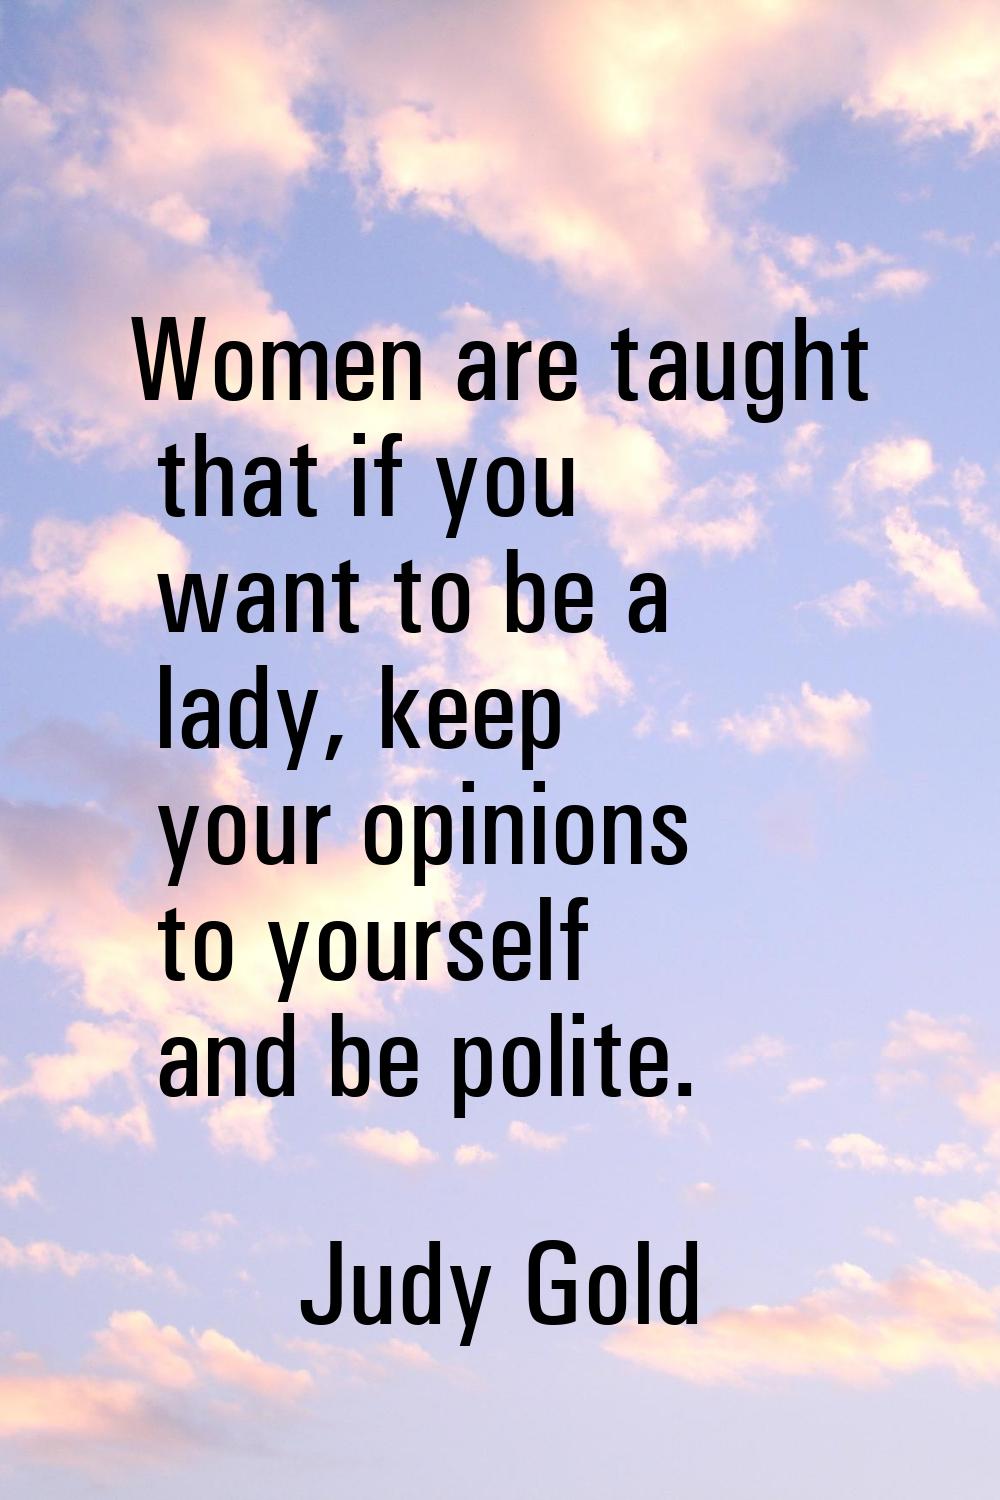 Women are taught that if you want to be a lady, keep your opinions to yourself and be polite.